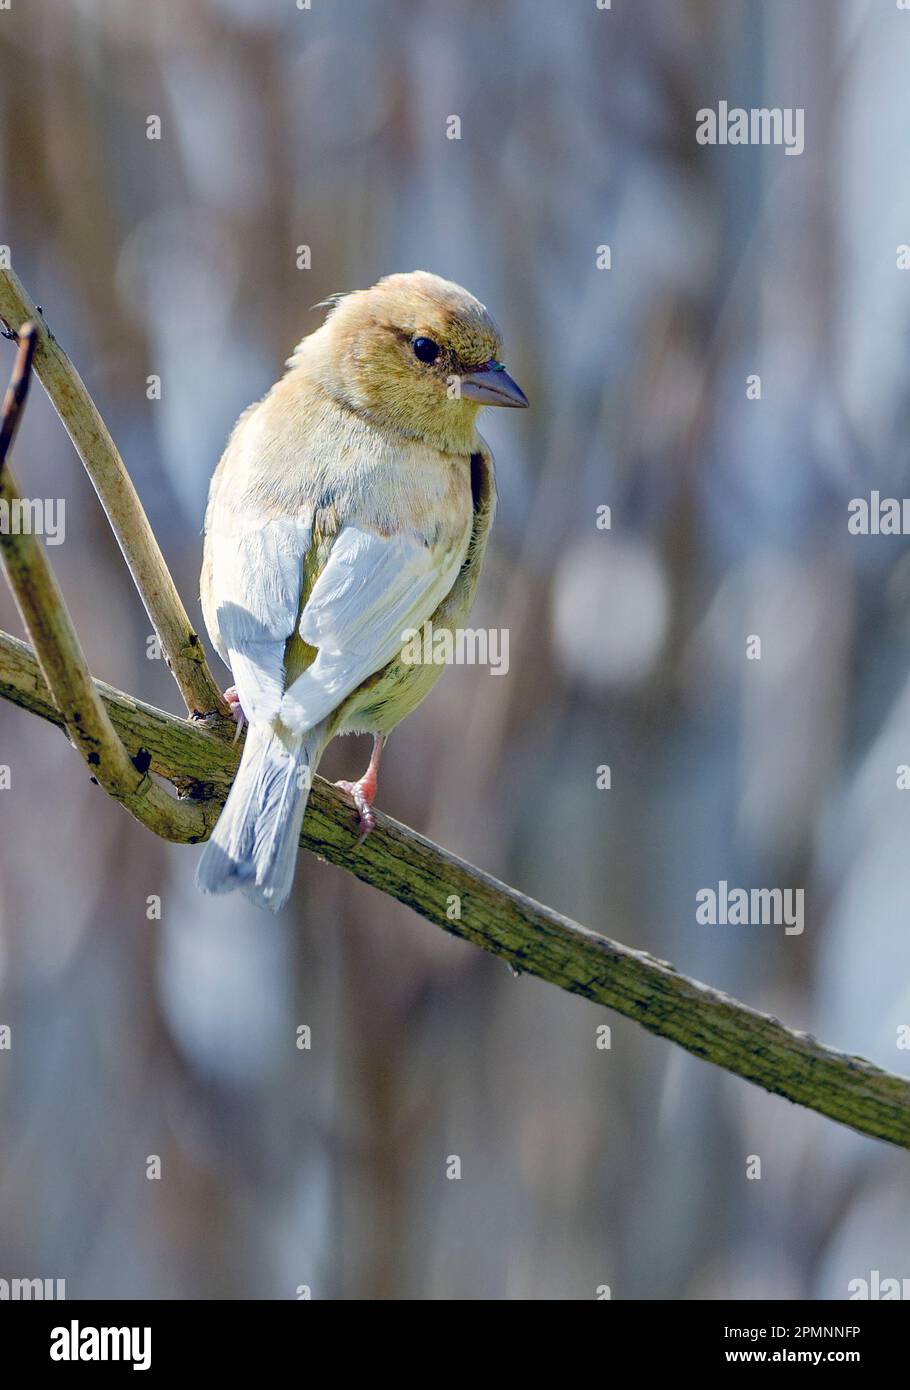 Leucistic common chaffinch (Fringilla coelebs) from Hidra, south-western Norway in April. The specimen shows a lack of natural pigmentation. Stock Photo